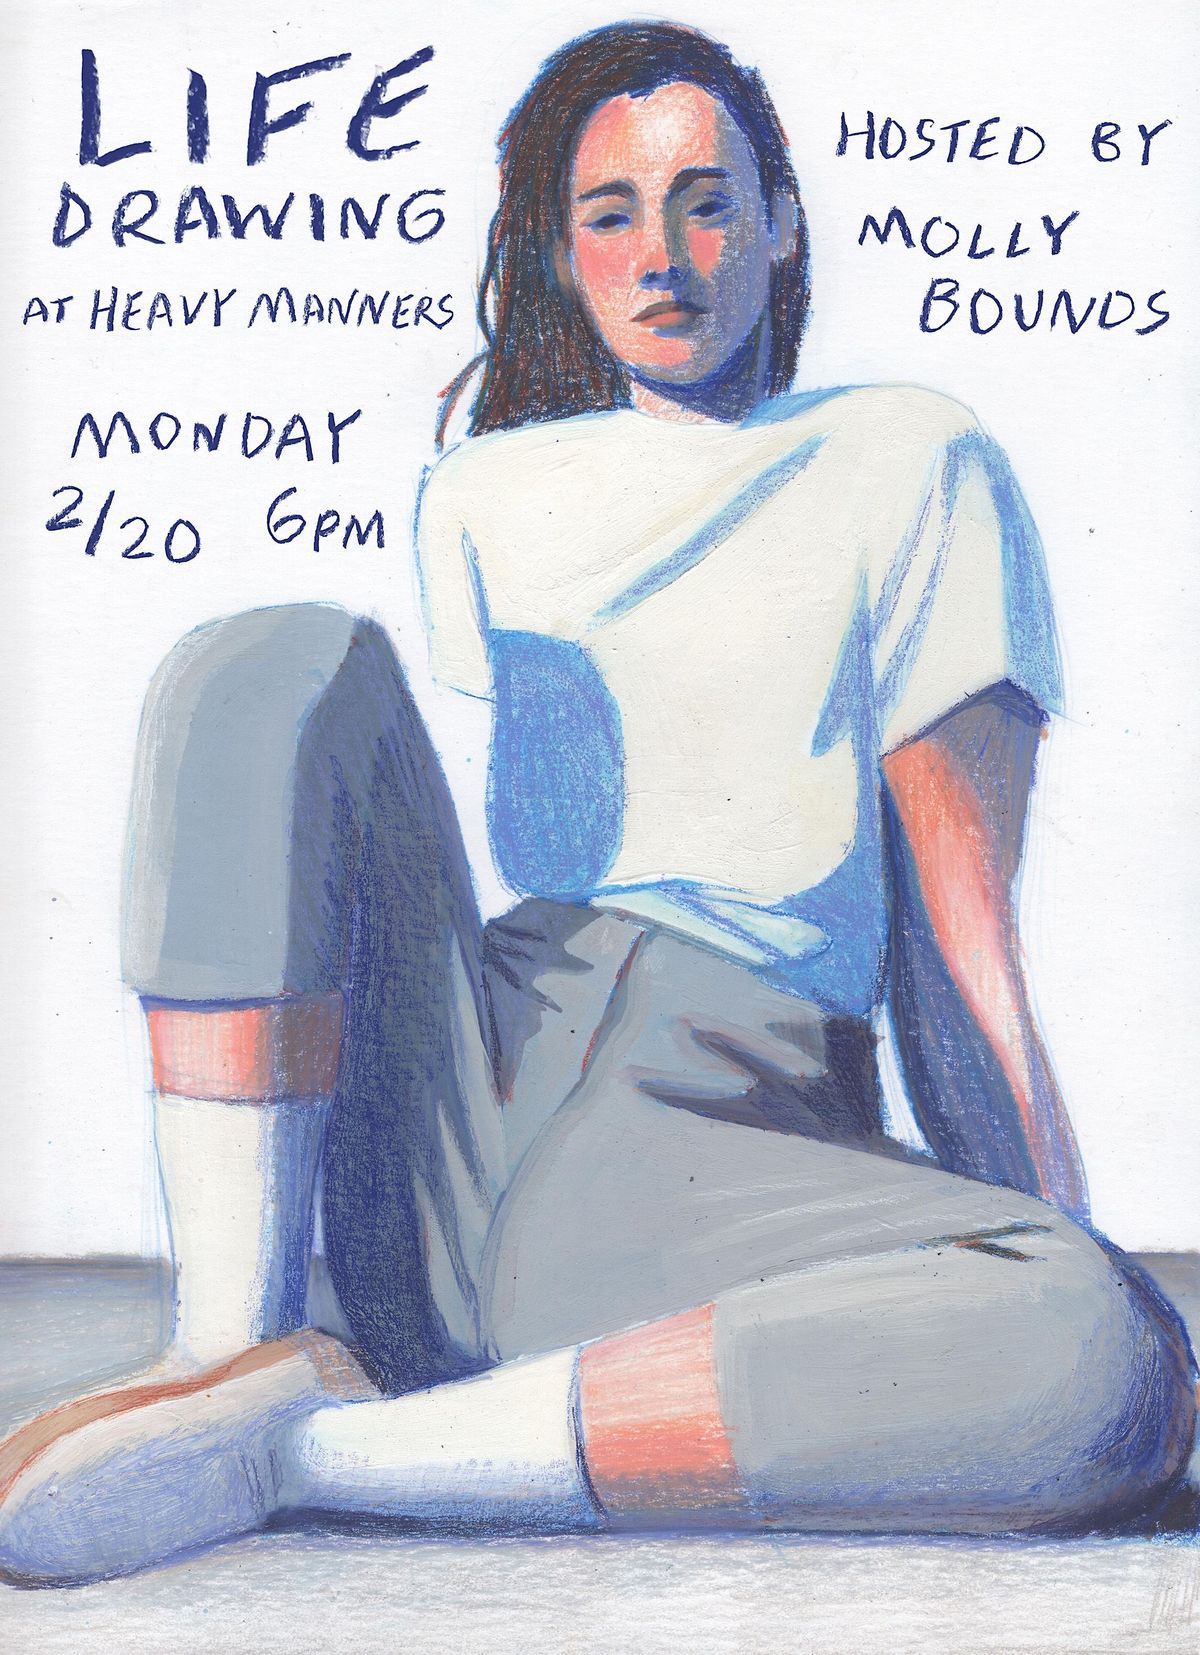 Life Drawing at Heavy Manners Hosted by Molly Bounds (2\/20)